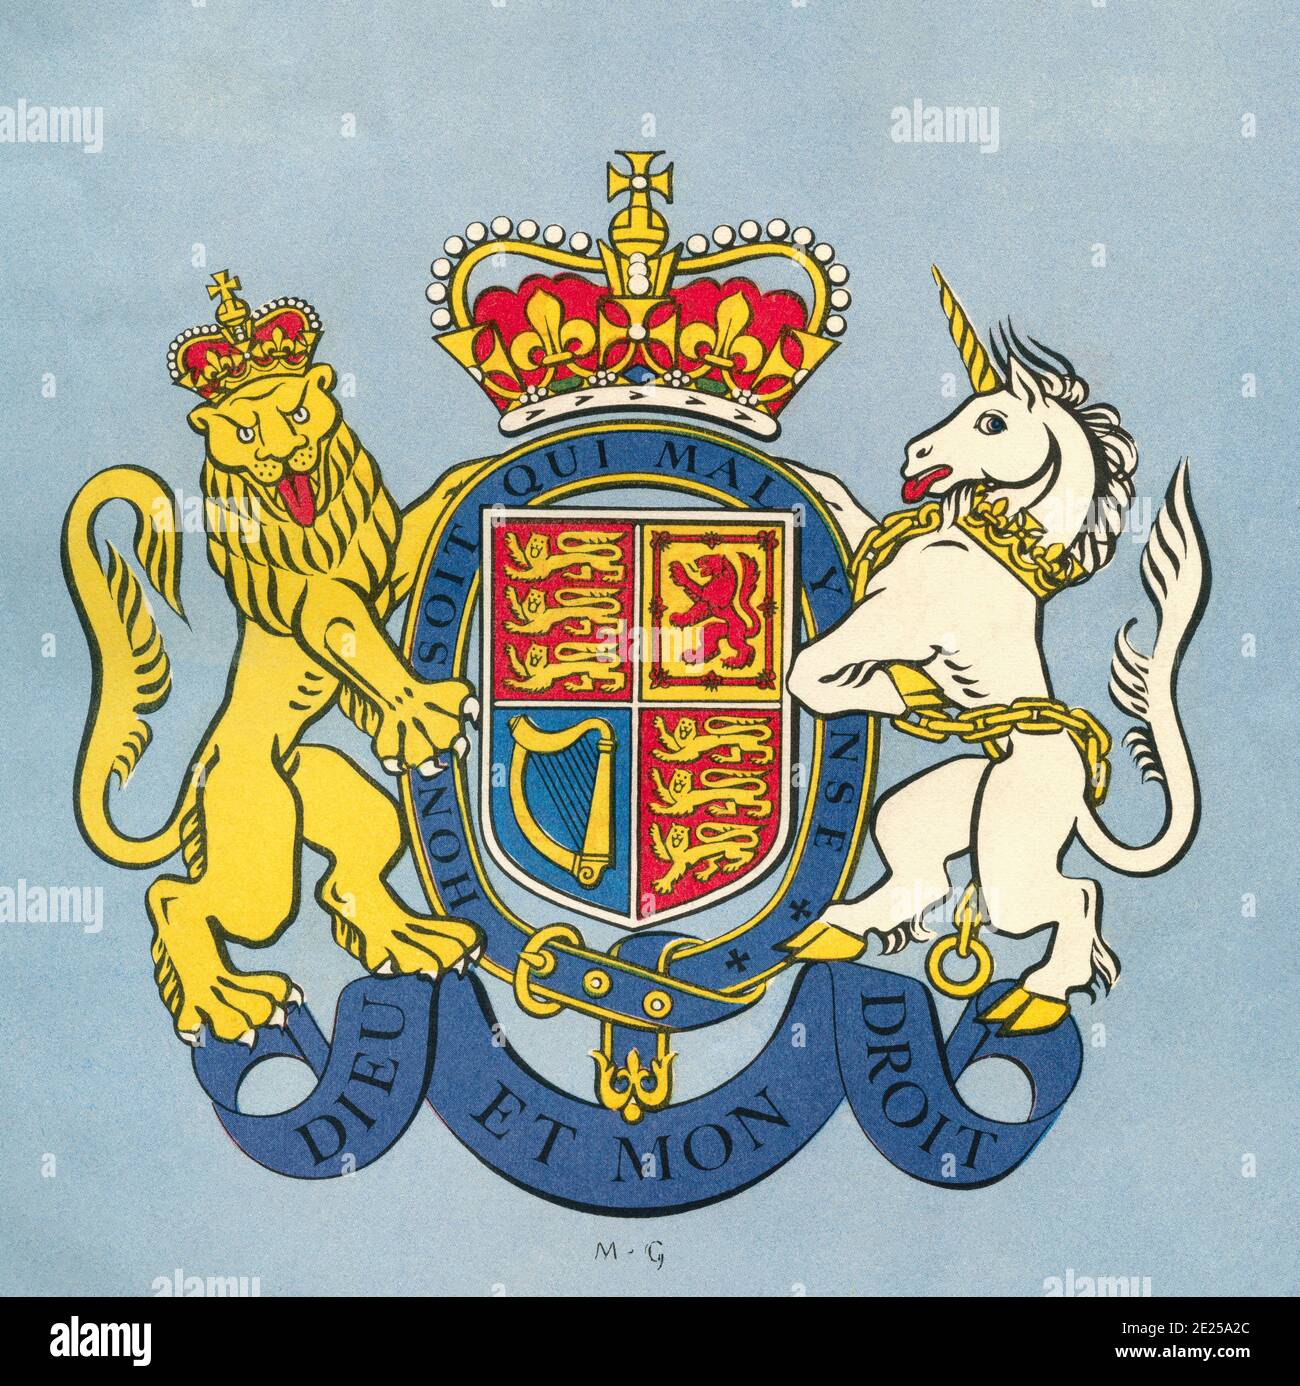 EDITORIAL ONLY The lion and the unicorn, the Royal coat of arms of the United Kingdom.  From The Queen Elizabeth Coronation Book, published 1953. Stock Photo